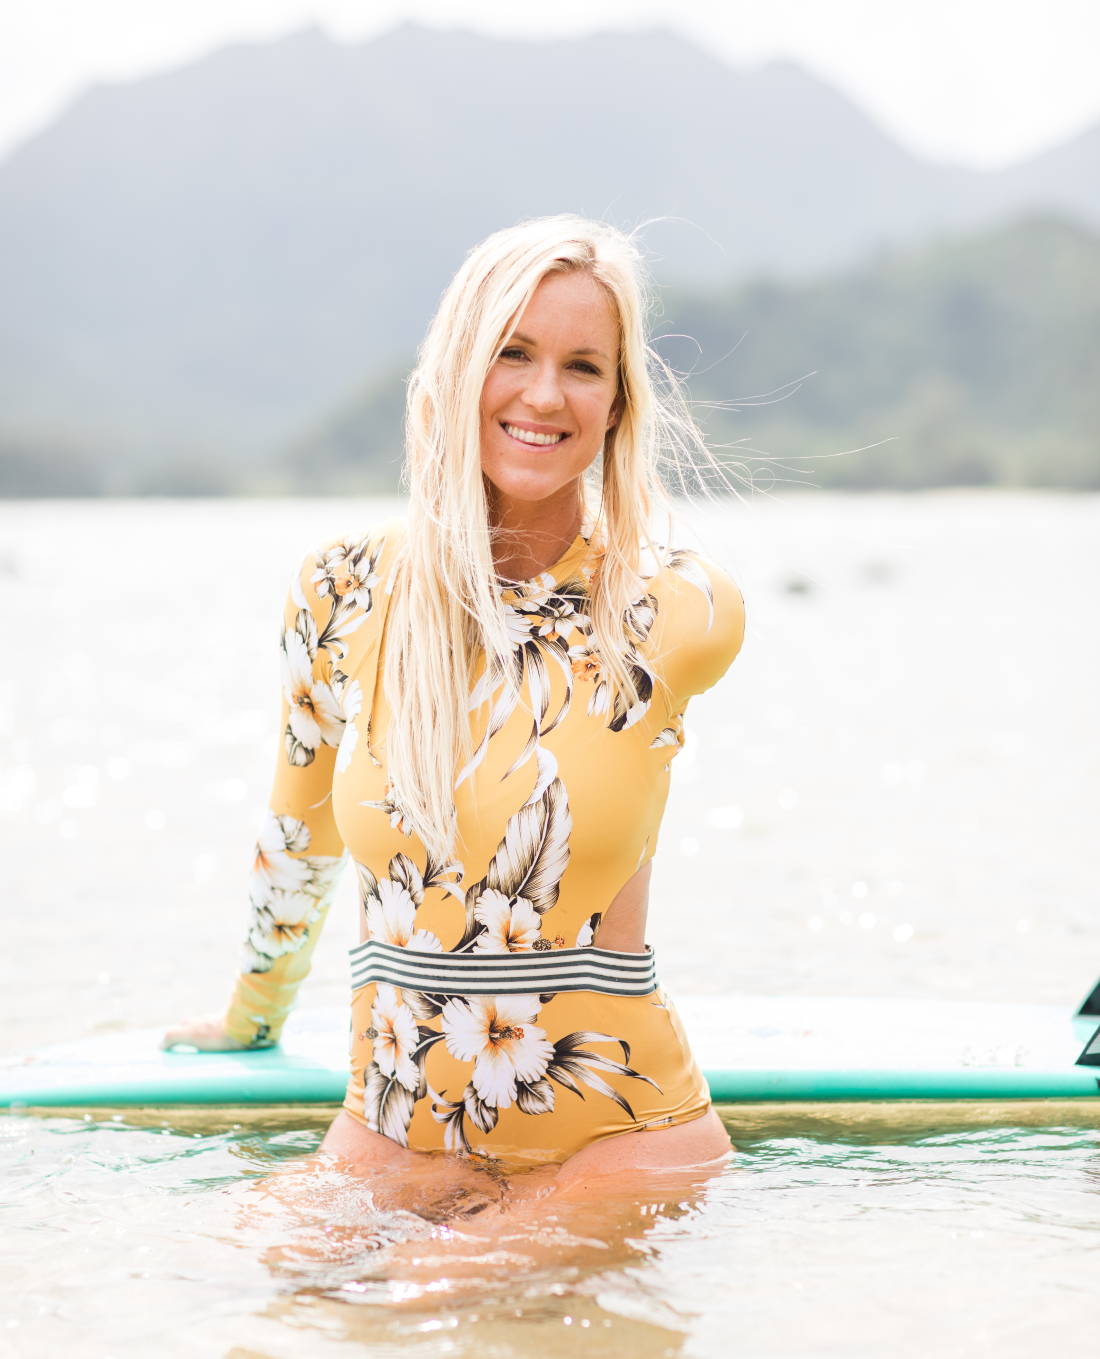 Bethany Hamilton poses in water with surfboard